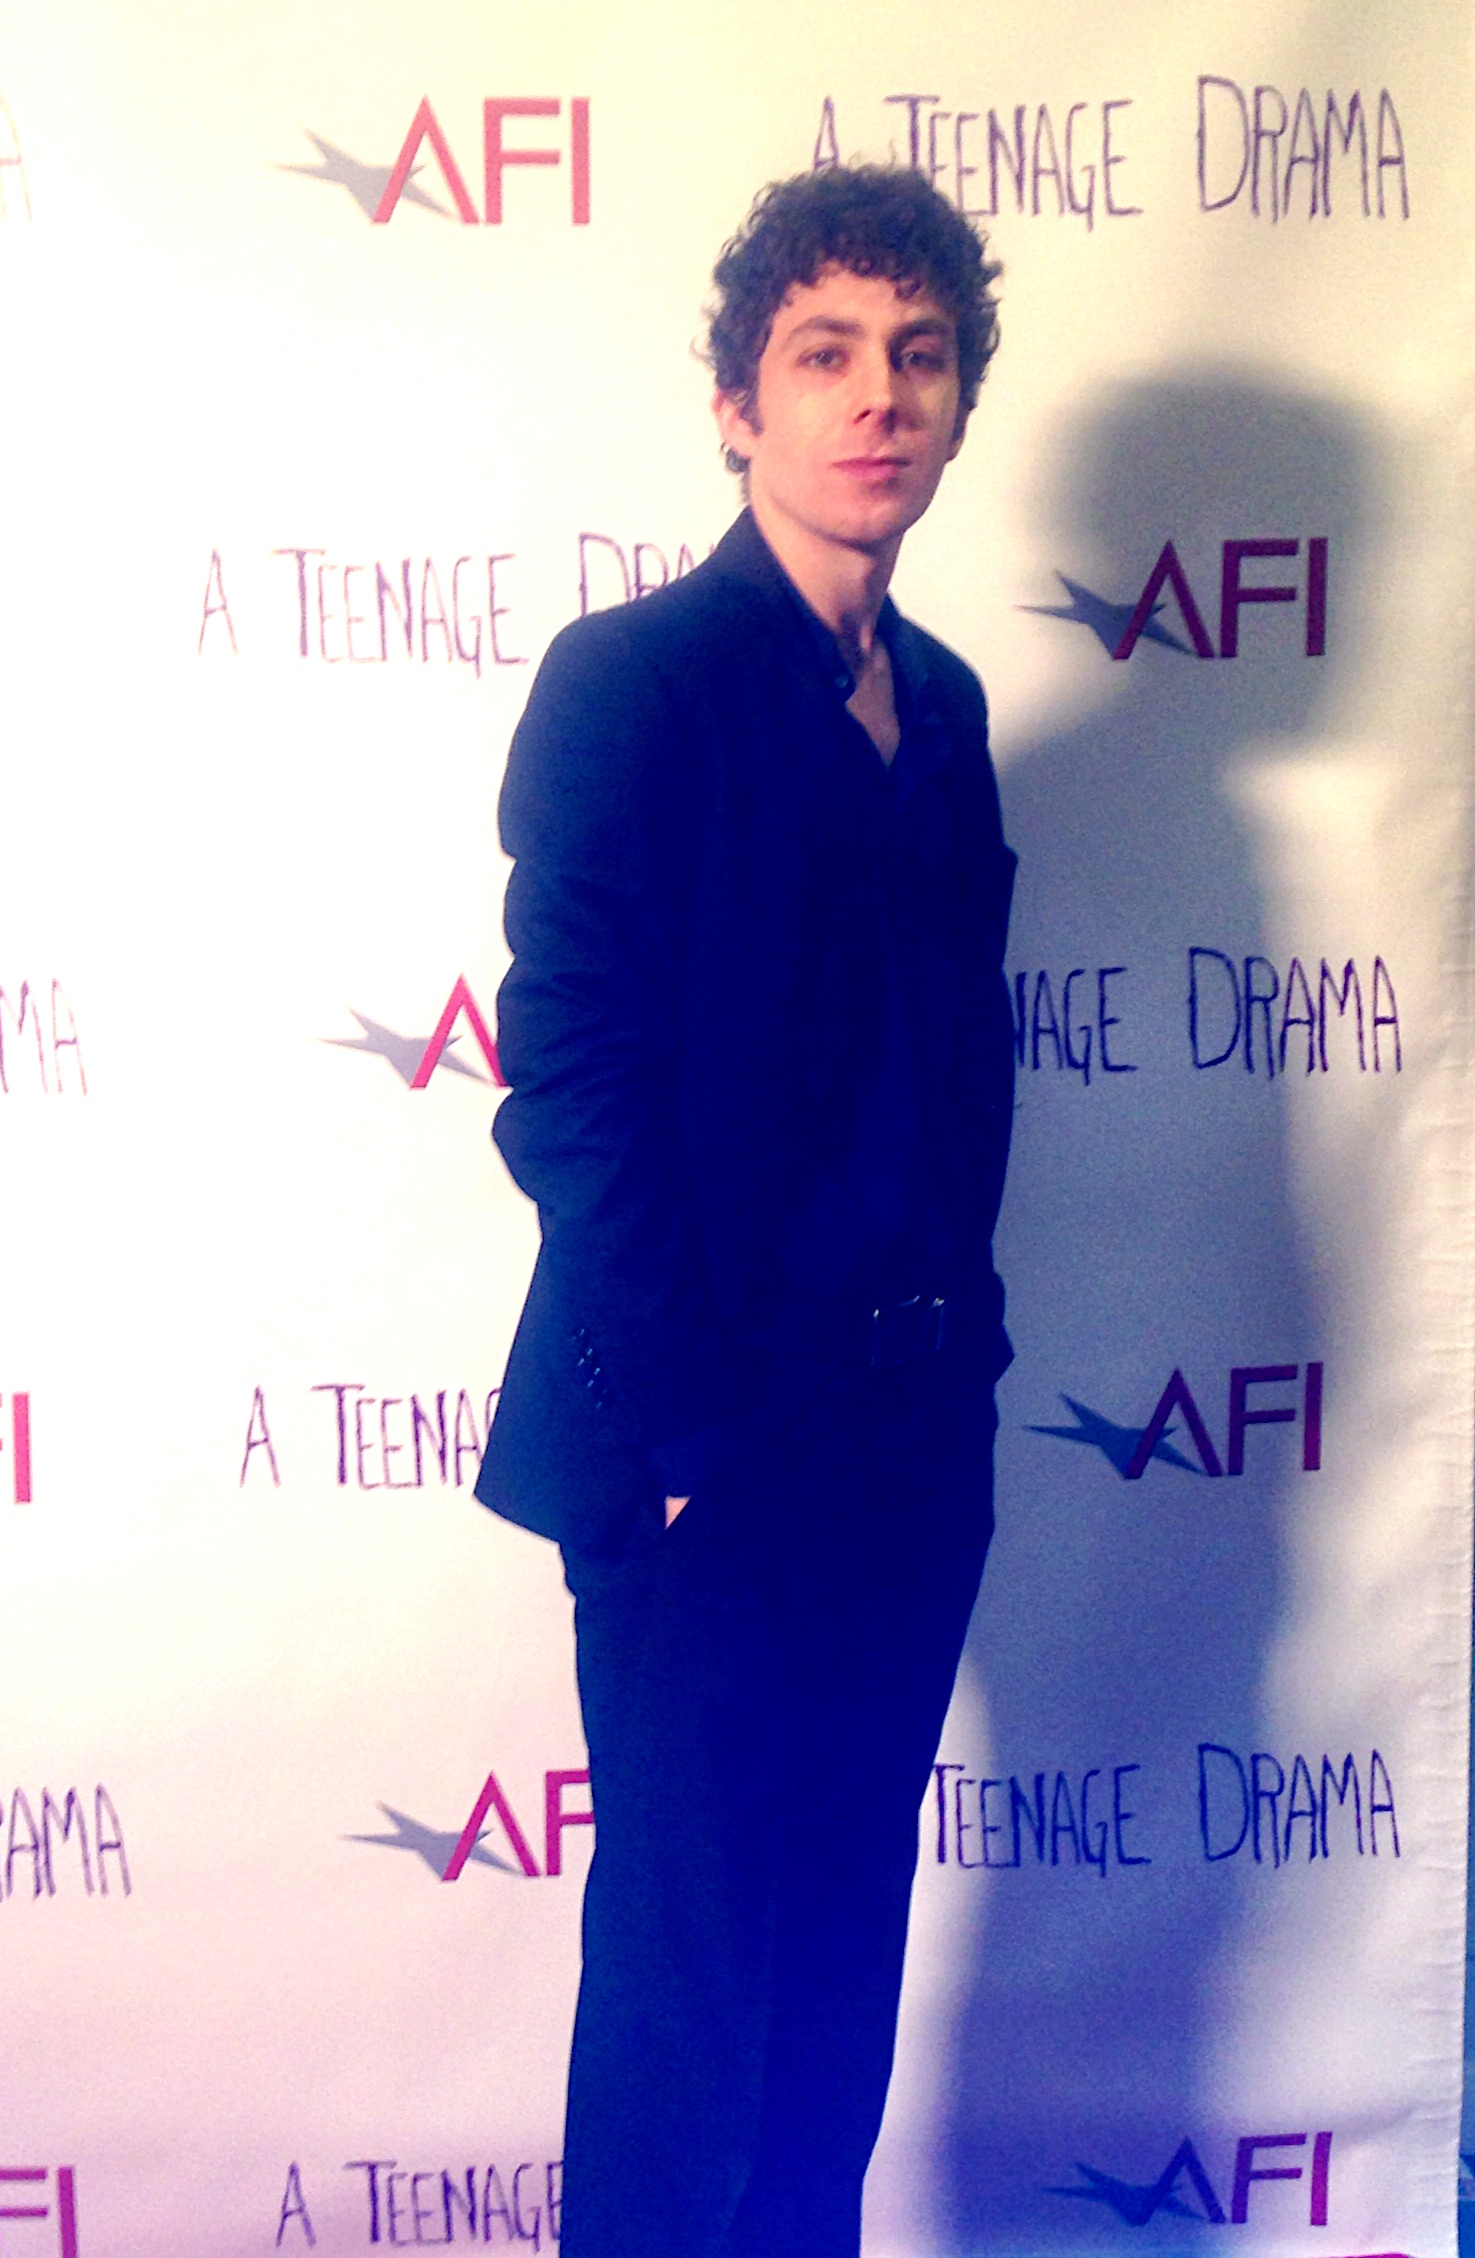 Alexander Crow at AFI premiere for A Teenage Drama.